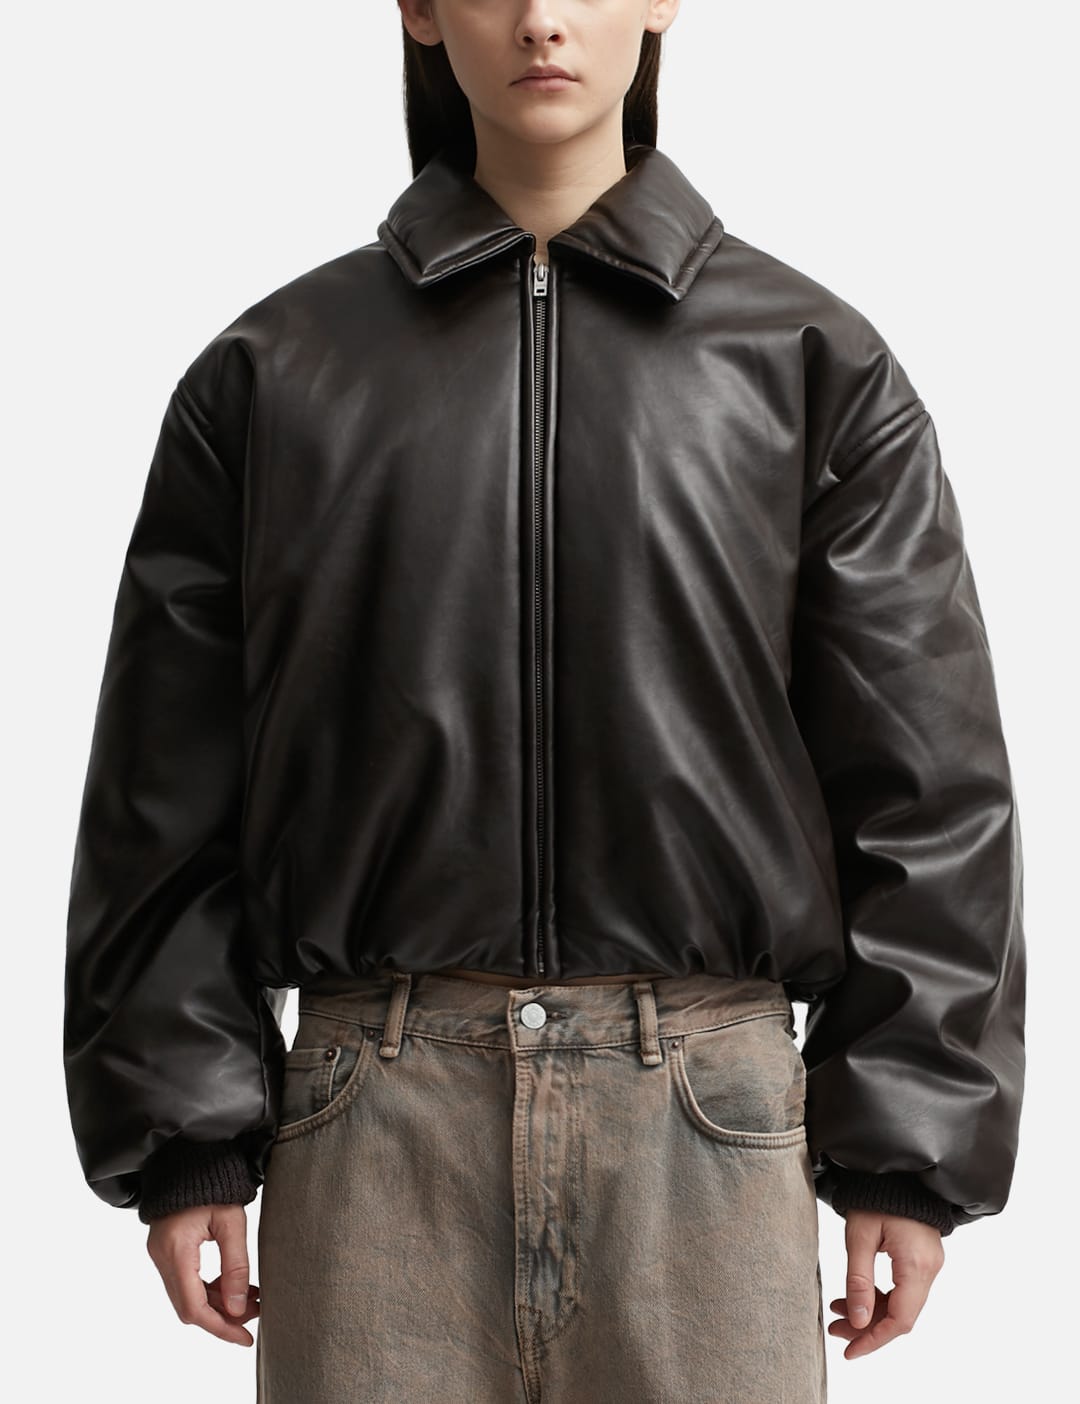 Acne Studios - Coated Bomber Jacket | HBX - Globally Curated Fashion and  Lifestyle by Hypebeast